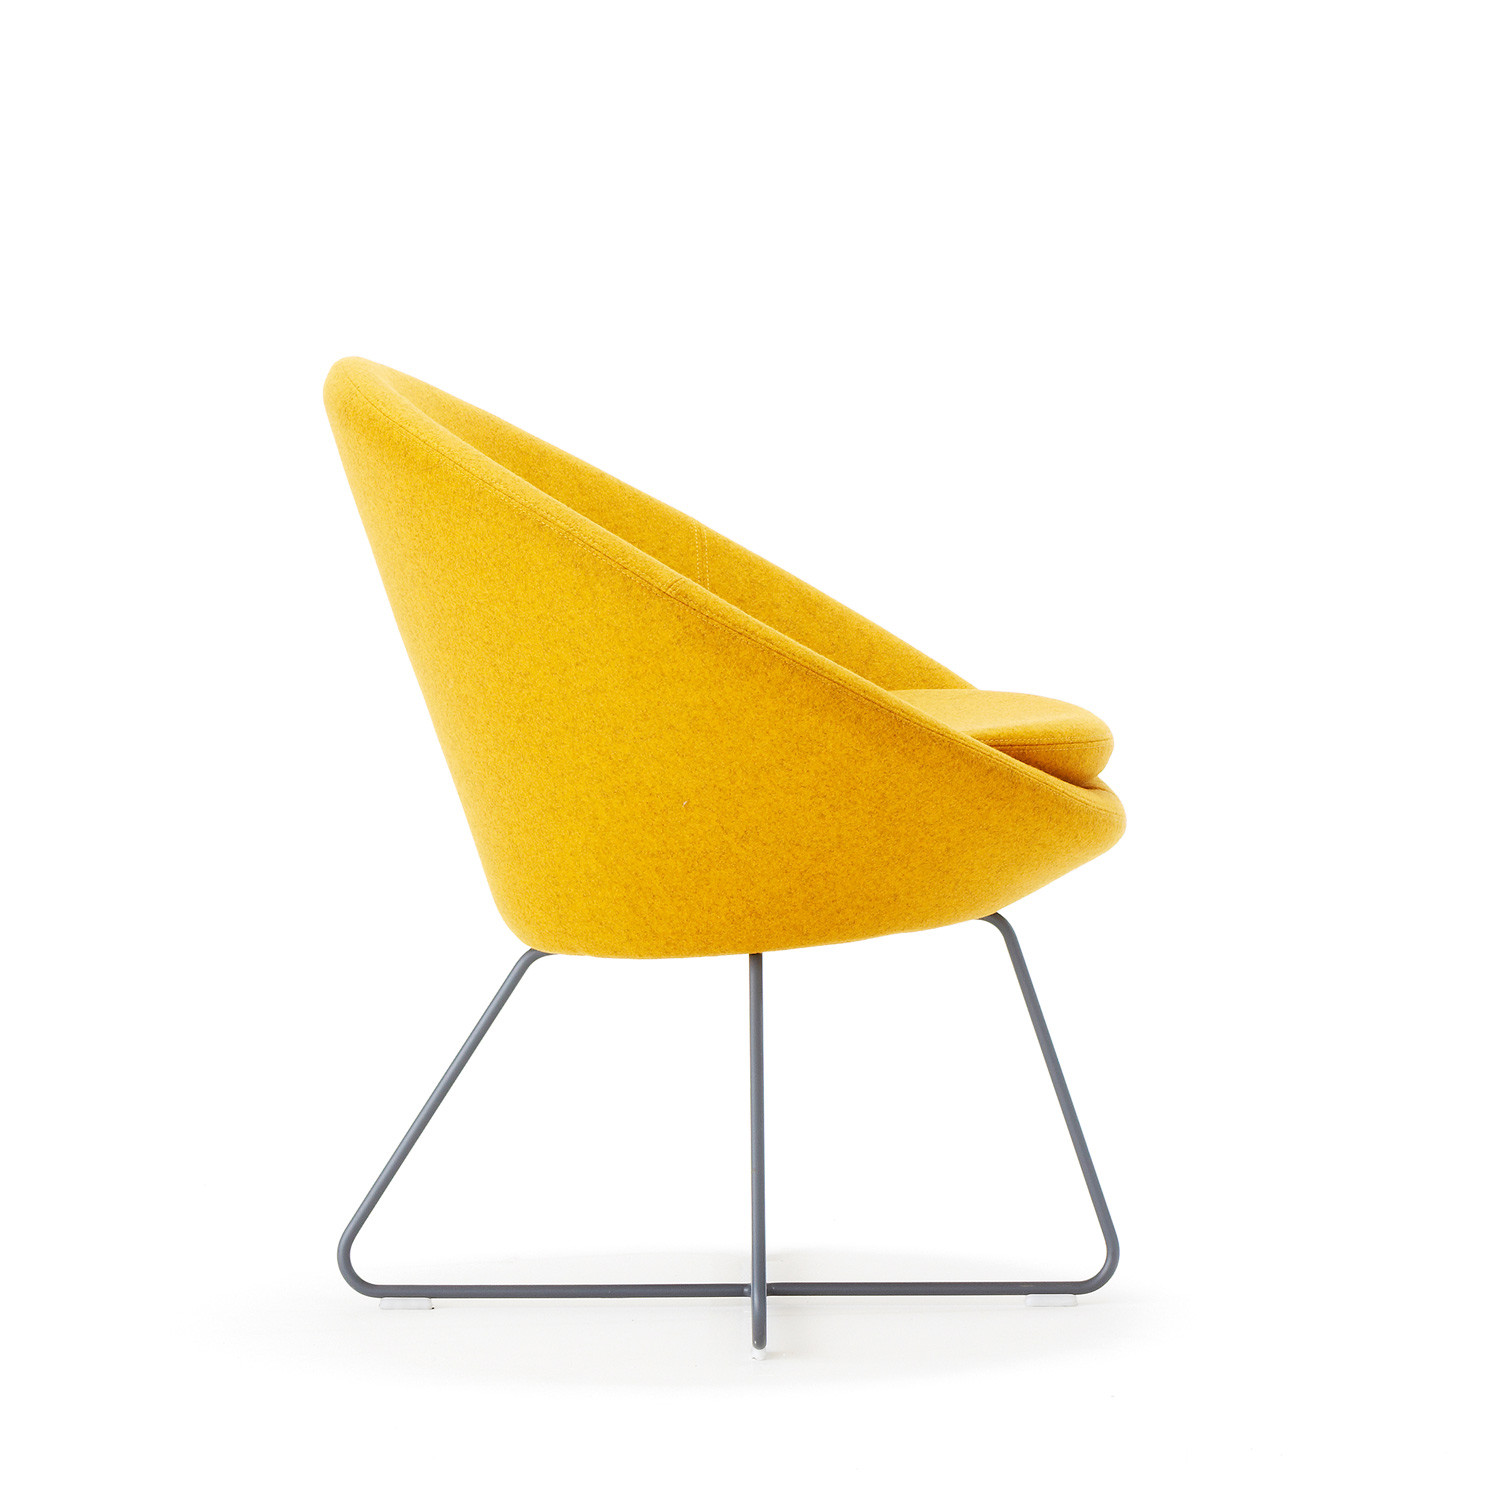 Conic Seating by PearsonLloyd